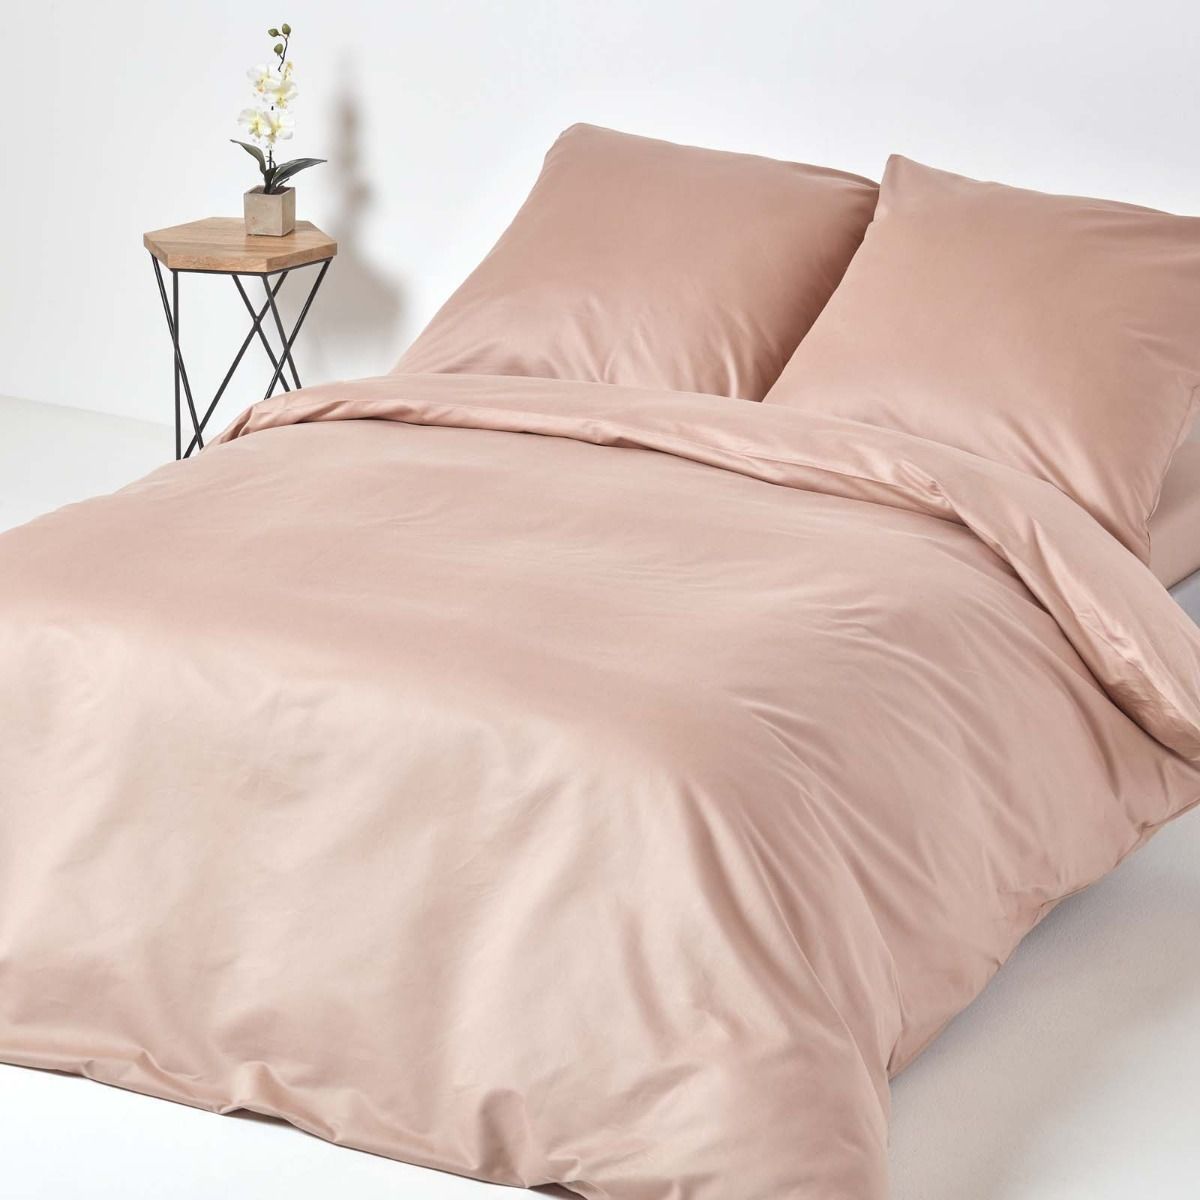 Kamas Solid Duvet Cover Sets 3 Pieces Oversized Queen Burgundy Duvet Cover Set 100/% Egyptian Cotton 600 Thread Count with Zipper Corner Ties Luxurious Quality